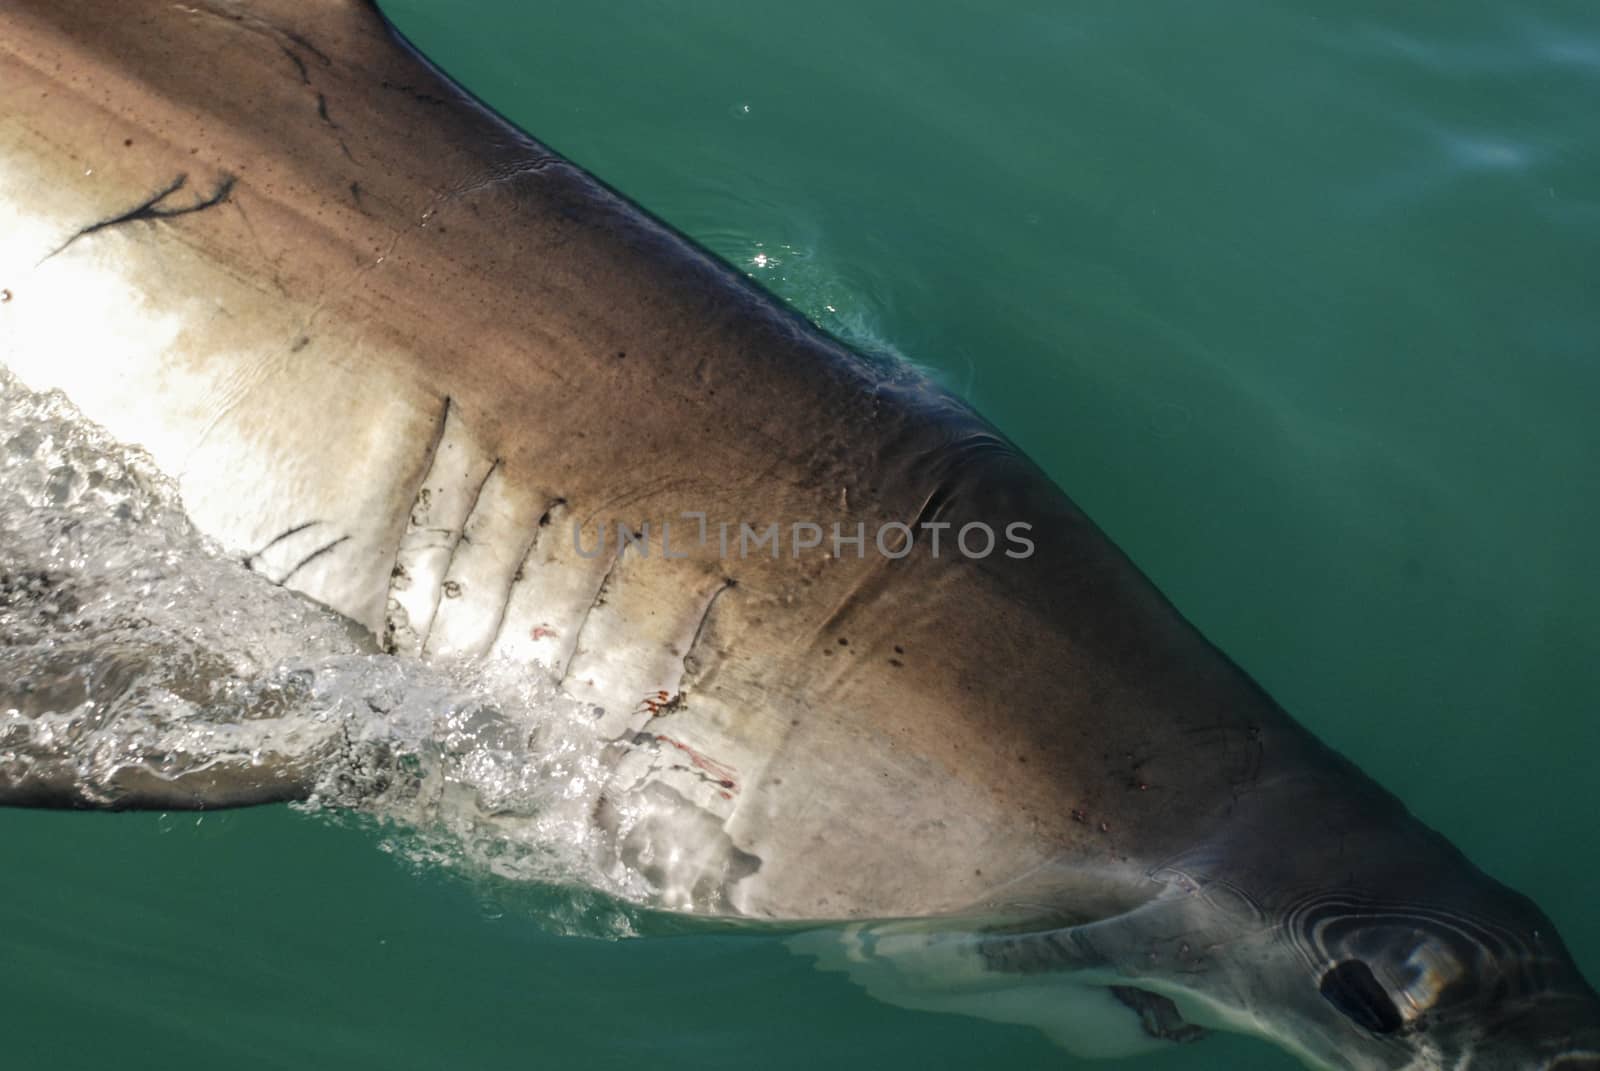 The gills of a great white shark, Gansbaai, South Africa